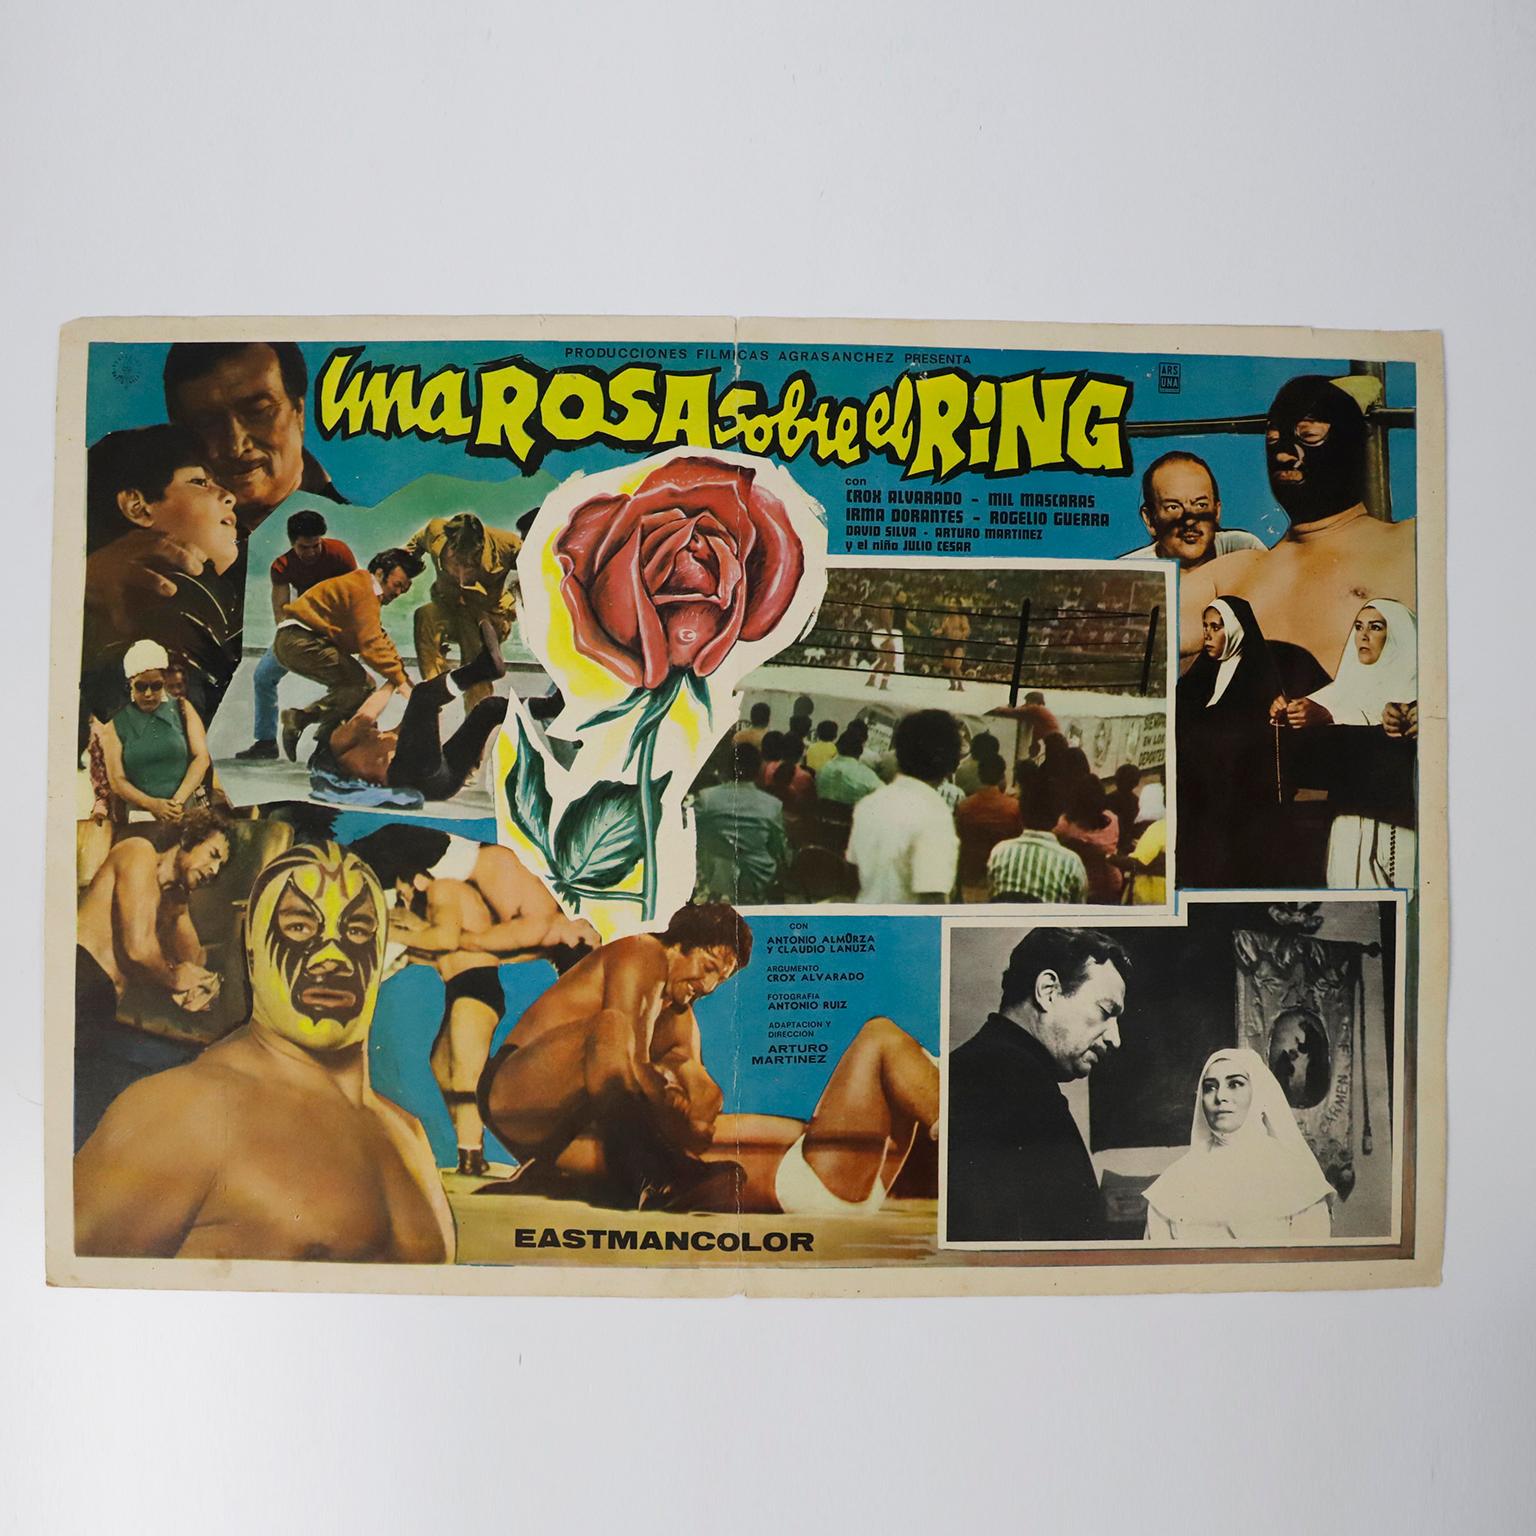 We offer this Fantastic Set of 6 original and rare Mexican Wrestling Movie Posters from 1950-1960, with the most iconic Mexican wrestling icon Santo, Blue Demon Mil Mascaras.